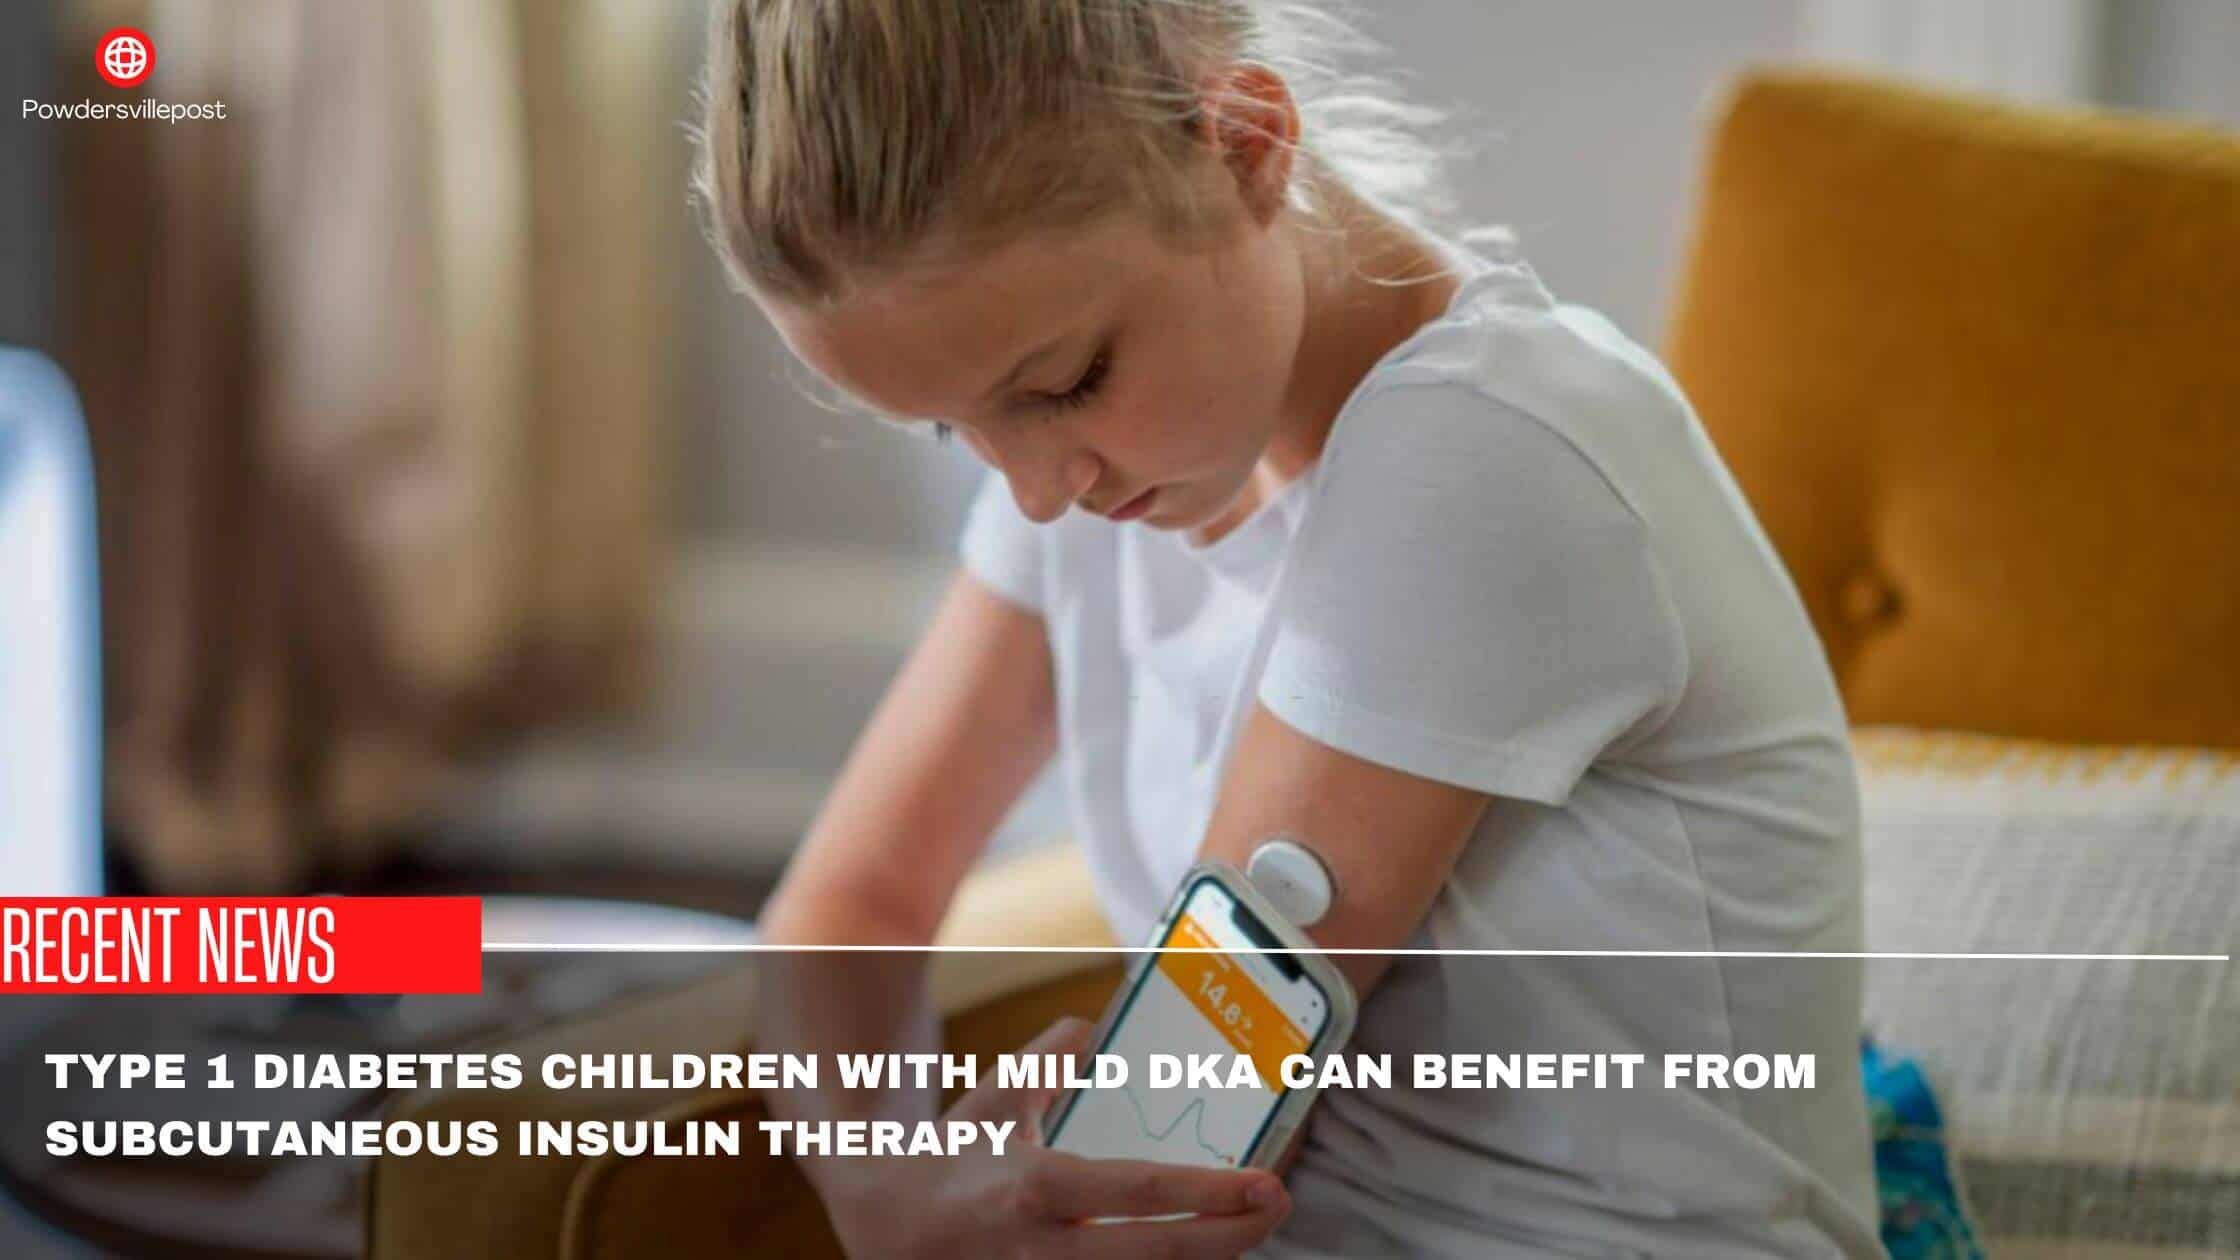 Type 1 Diabetes Children With Mild DKA Can Benefit From Subcutaneous Insulin Therapy